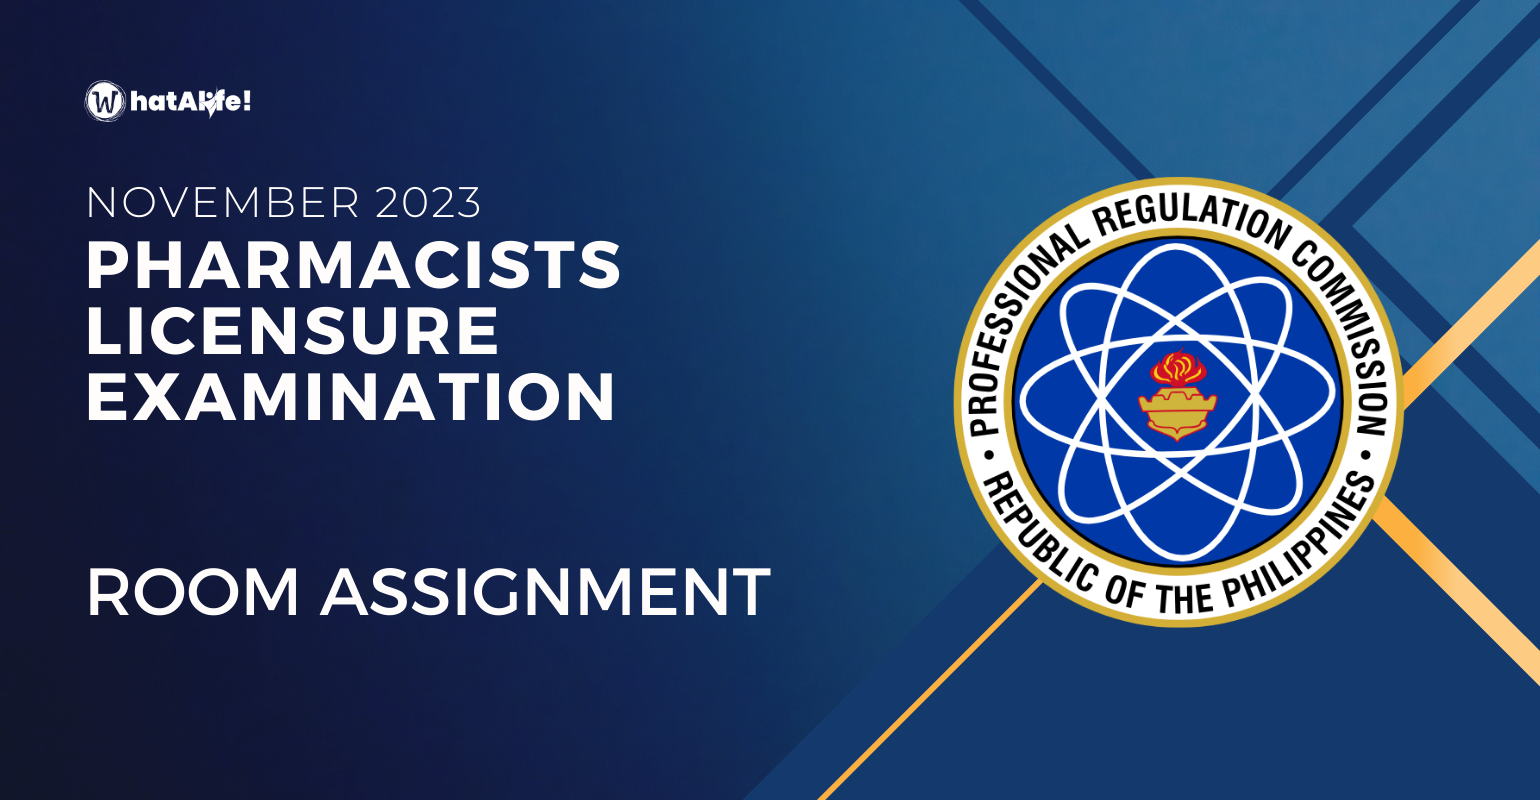 Room Assignment — November 2023 Pharmacists Licensure Exam